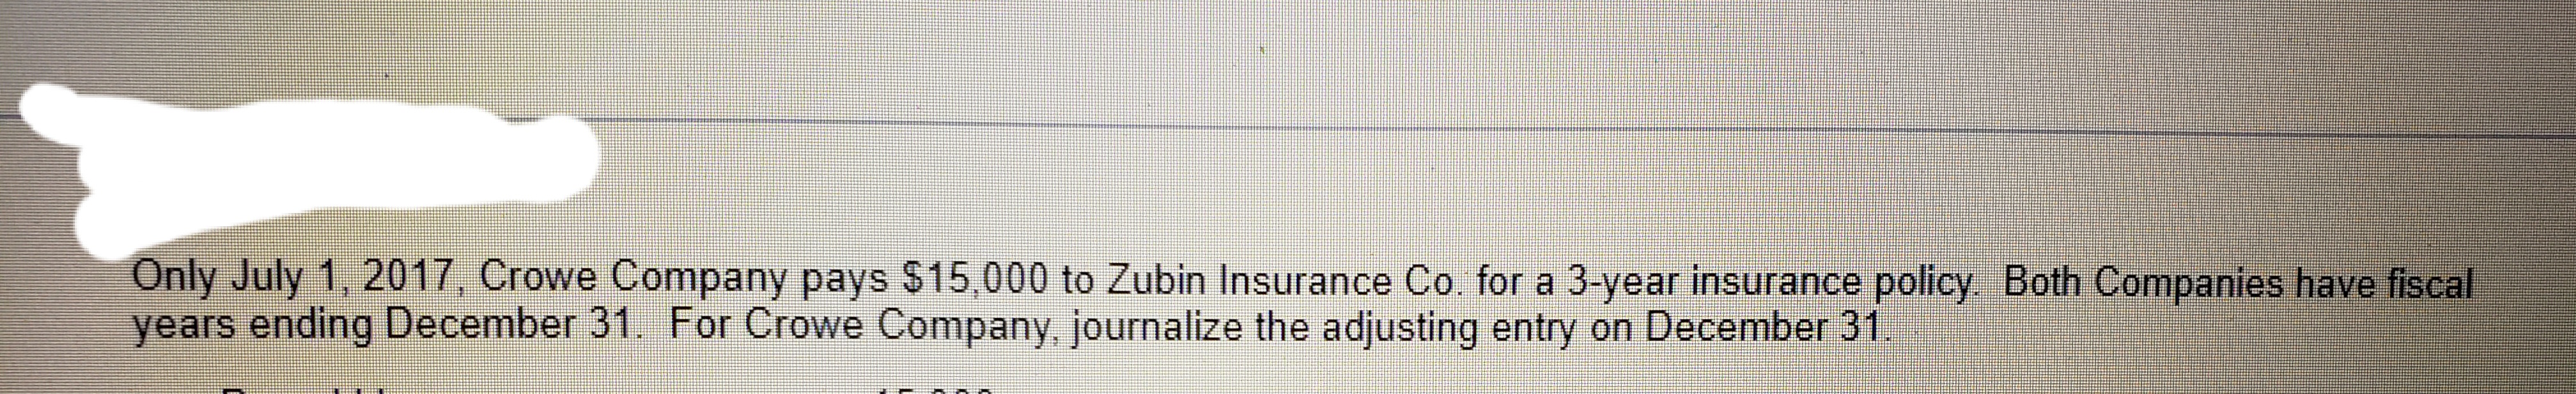 Only July 1, 2017, Crowe Company pays $15,000 to Zubin Insurance Co. for a 3-year insurance policy. Both Companies have fiscal
years ending December 31. For Crowe Company, journalize the adjusting entry on December 31.
